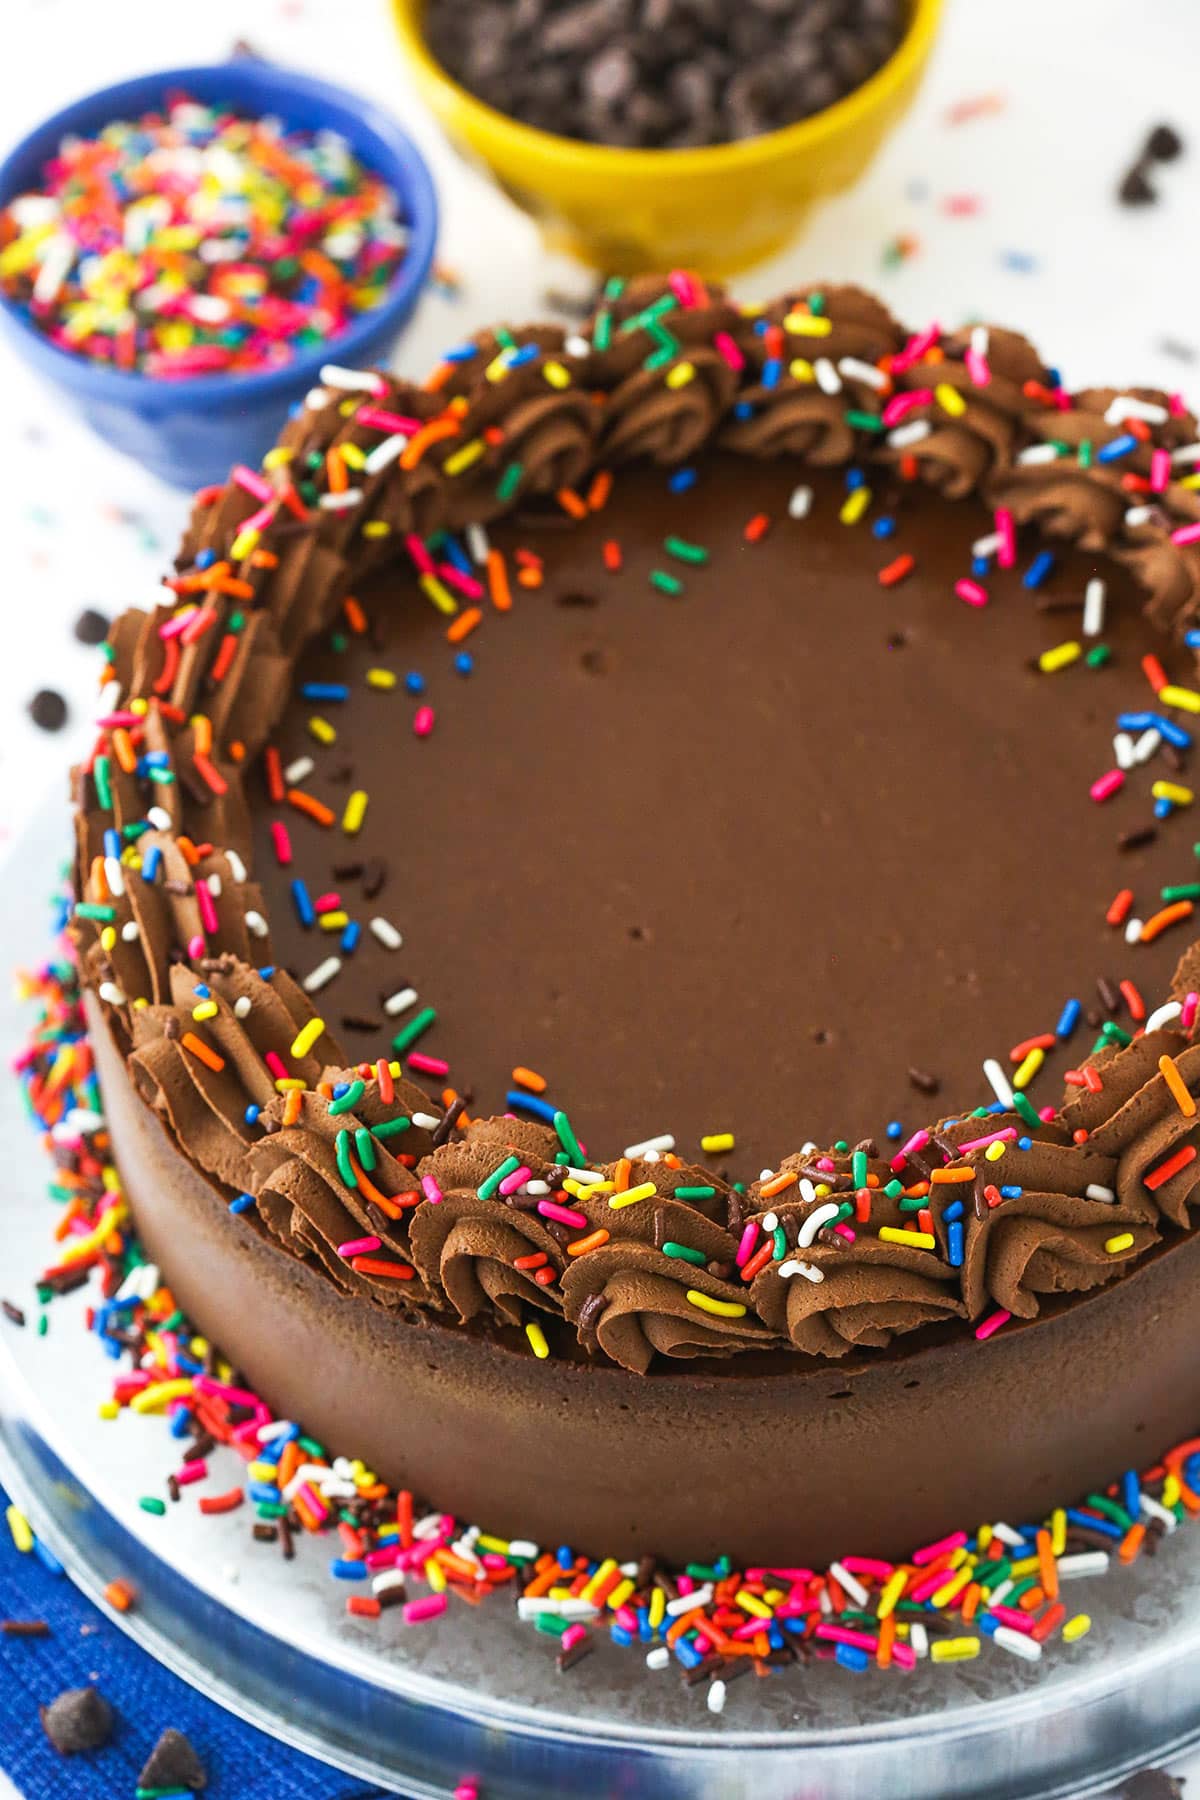 A chocolate cheesecake on a cake platter with rainbow sprinkles on top